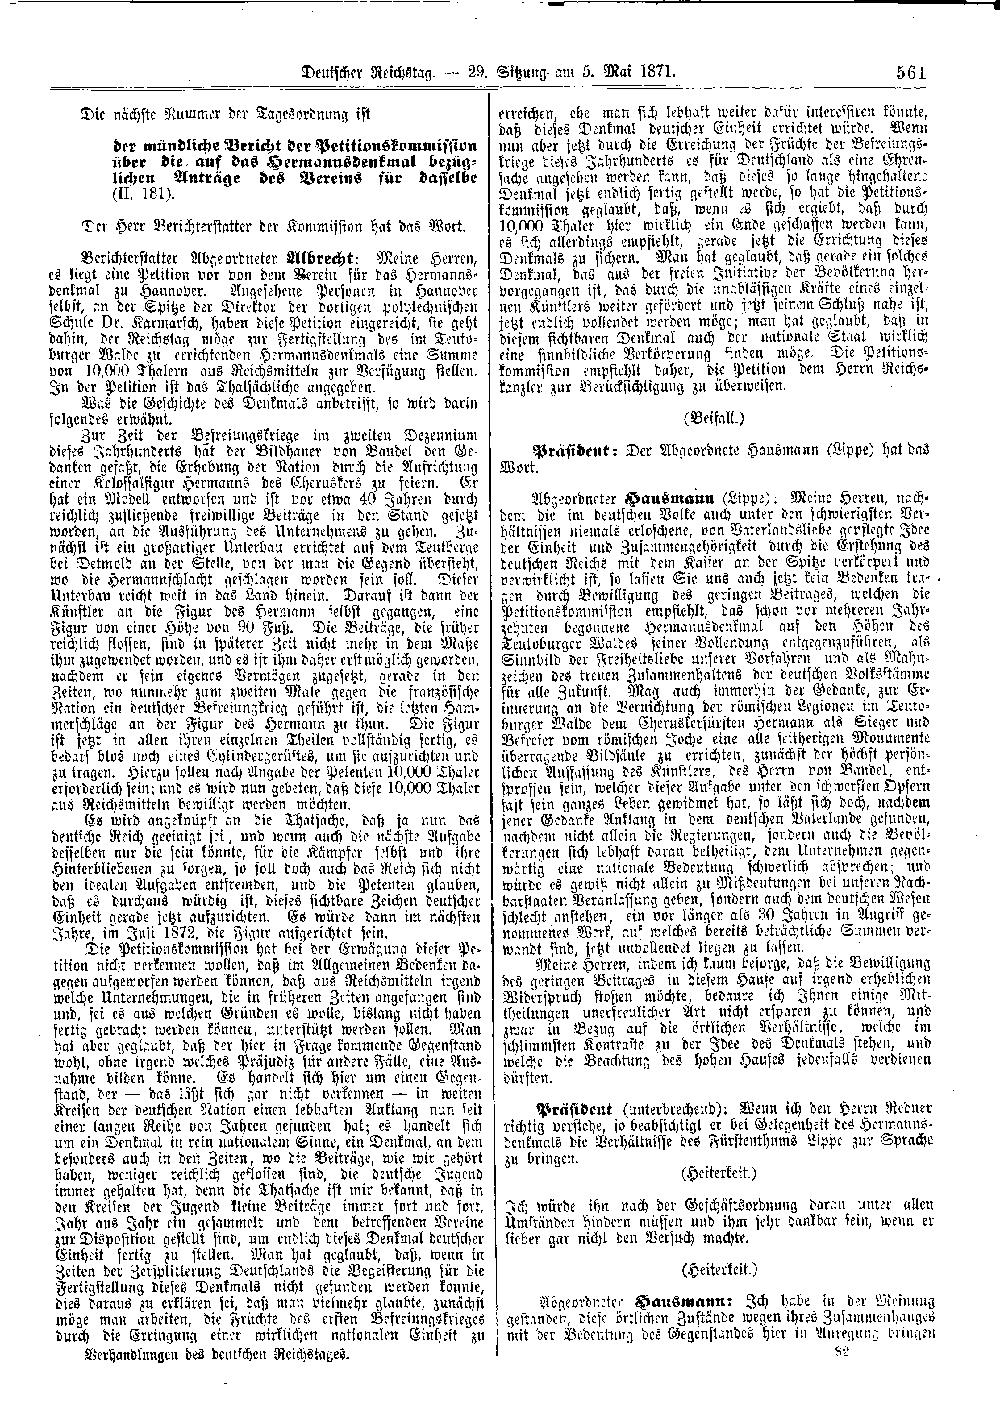 Scan of page 561